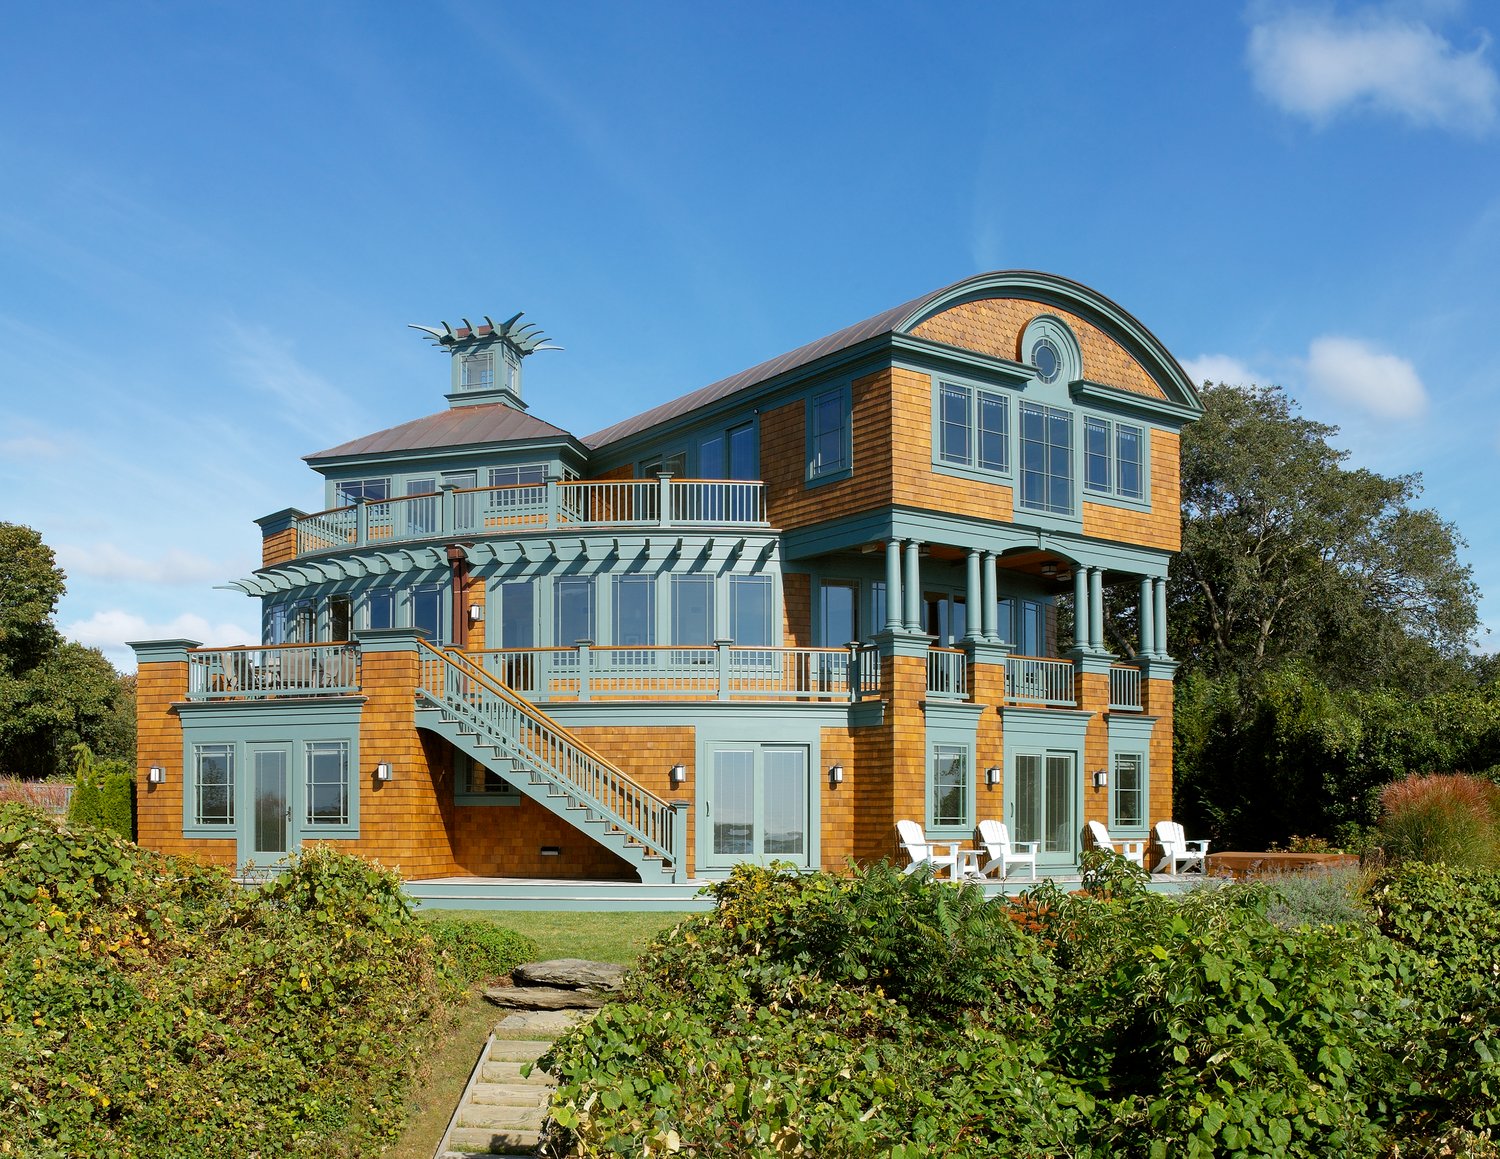 This modern shingle style residence is located in Westerly, overlooking  Quonochontaug Pond, with views of Block Island, Fisher’s Island and the Atlantic Ocean. The exterior draws its influence from historical New England structures, yet the traditional elements are purposely contrasted with a much more contemporary approach to the house’s form.